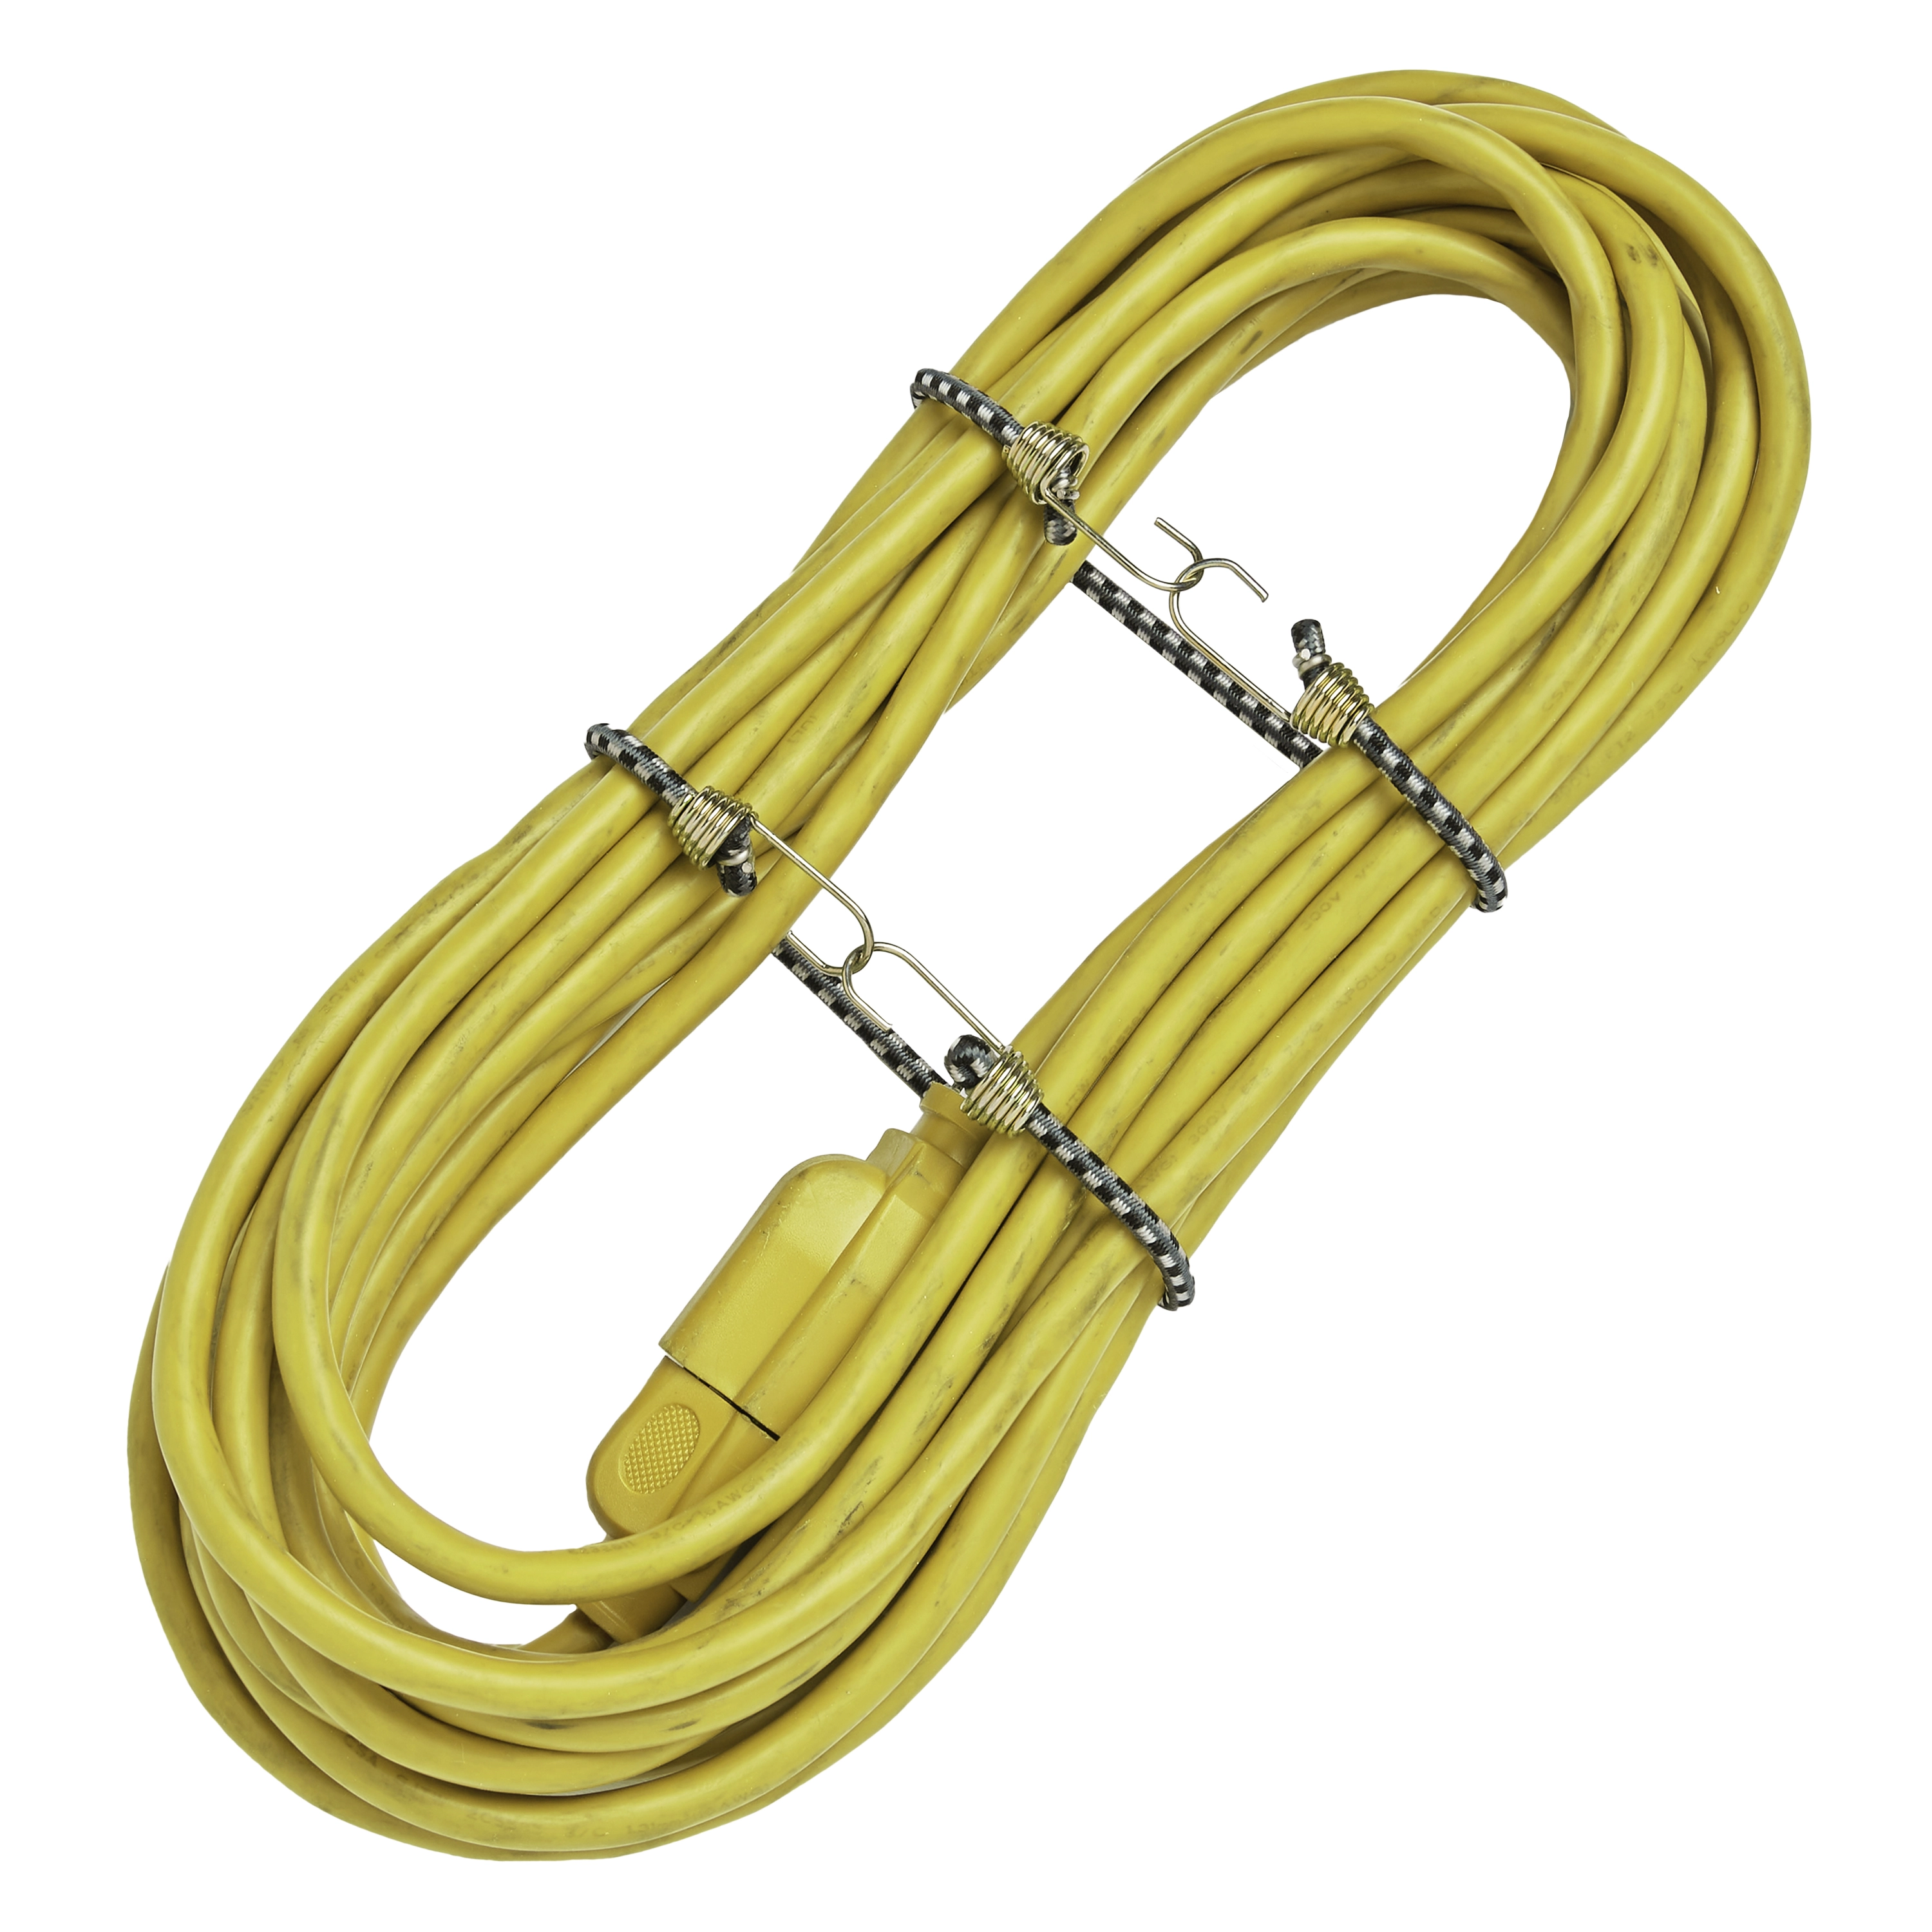 10" Mini Bungee Cord, 20 Pack variant image view